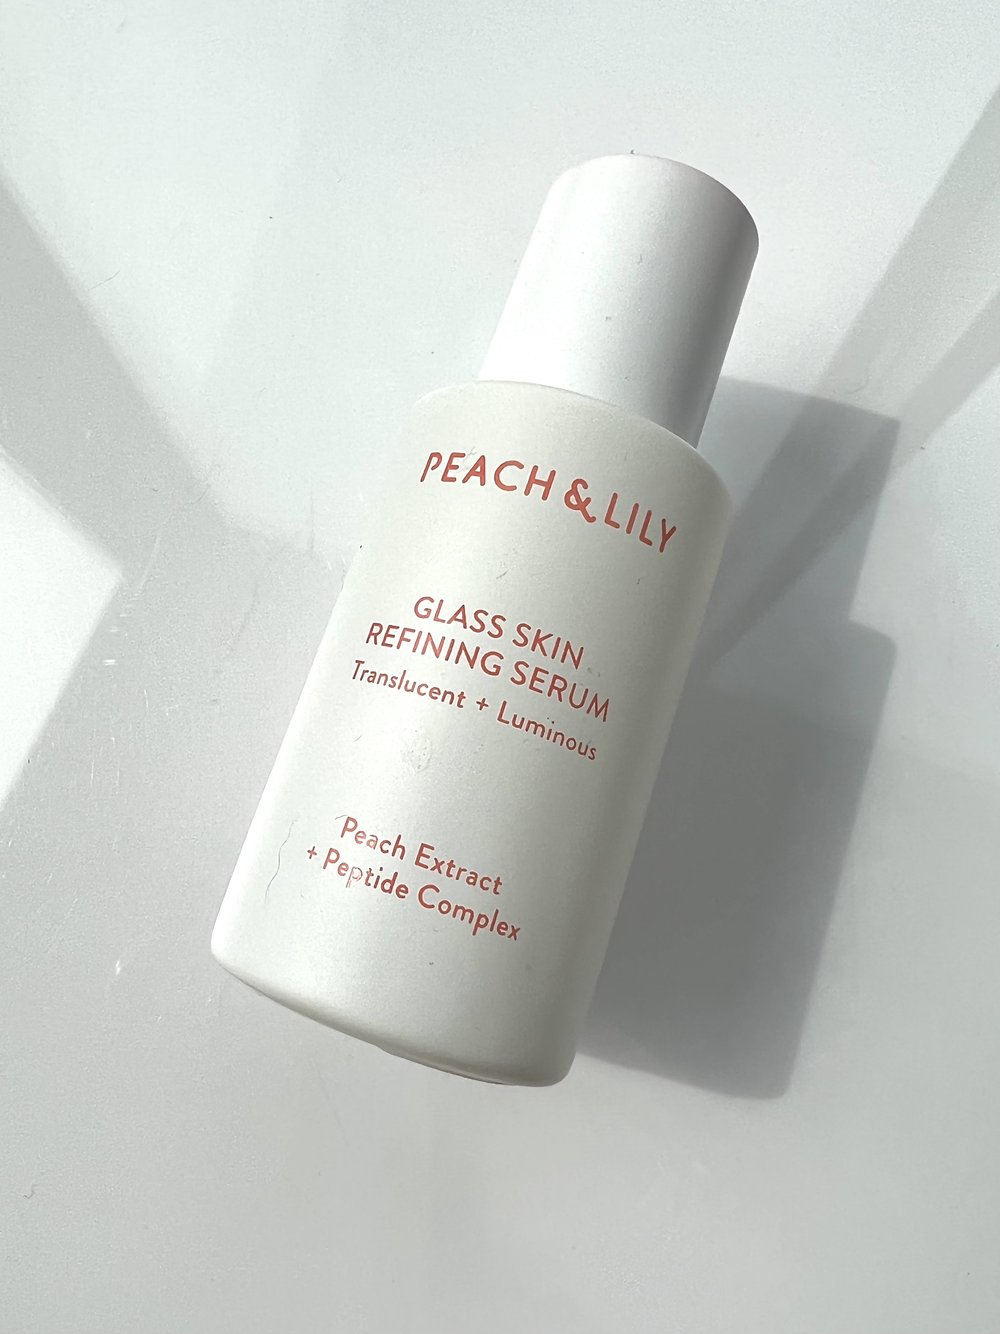 HOW TO GET GLASS SKIN WITH THE PEACH & LILY GLASS SKIN REFINING SERUM –  BEST NIACINAMIDE SERUM